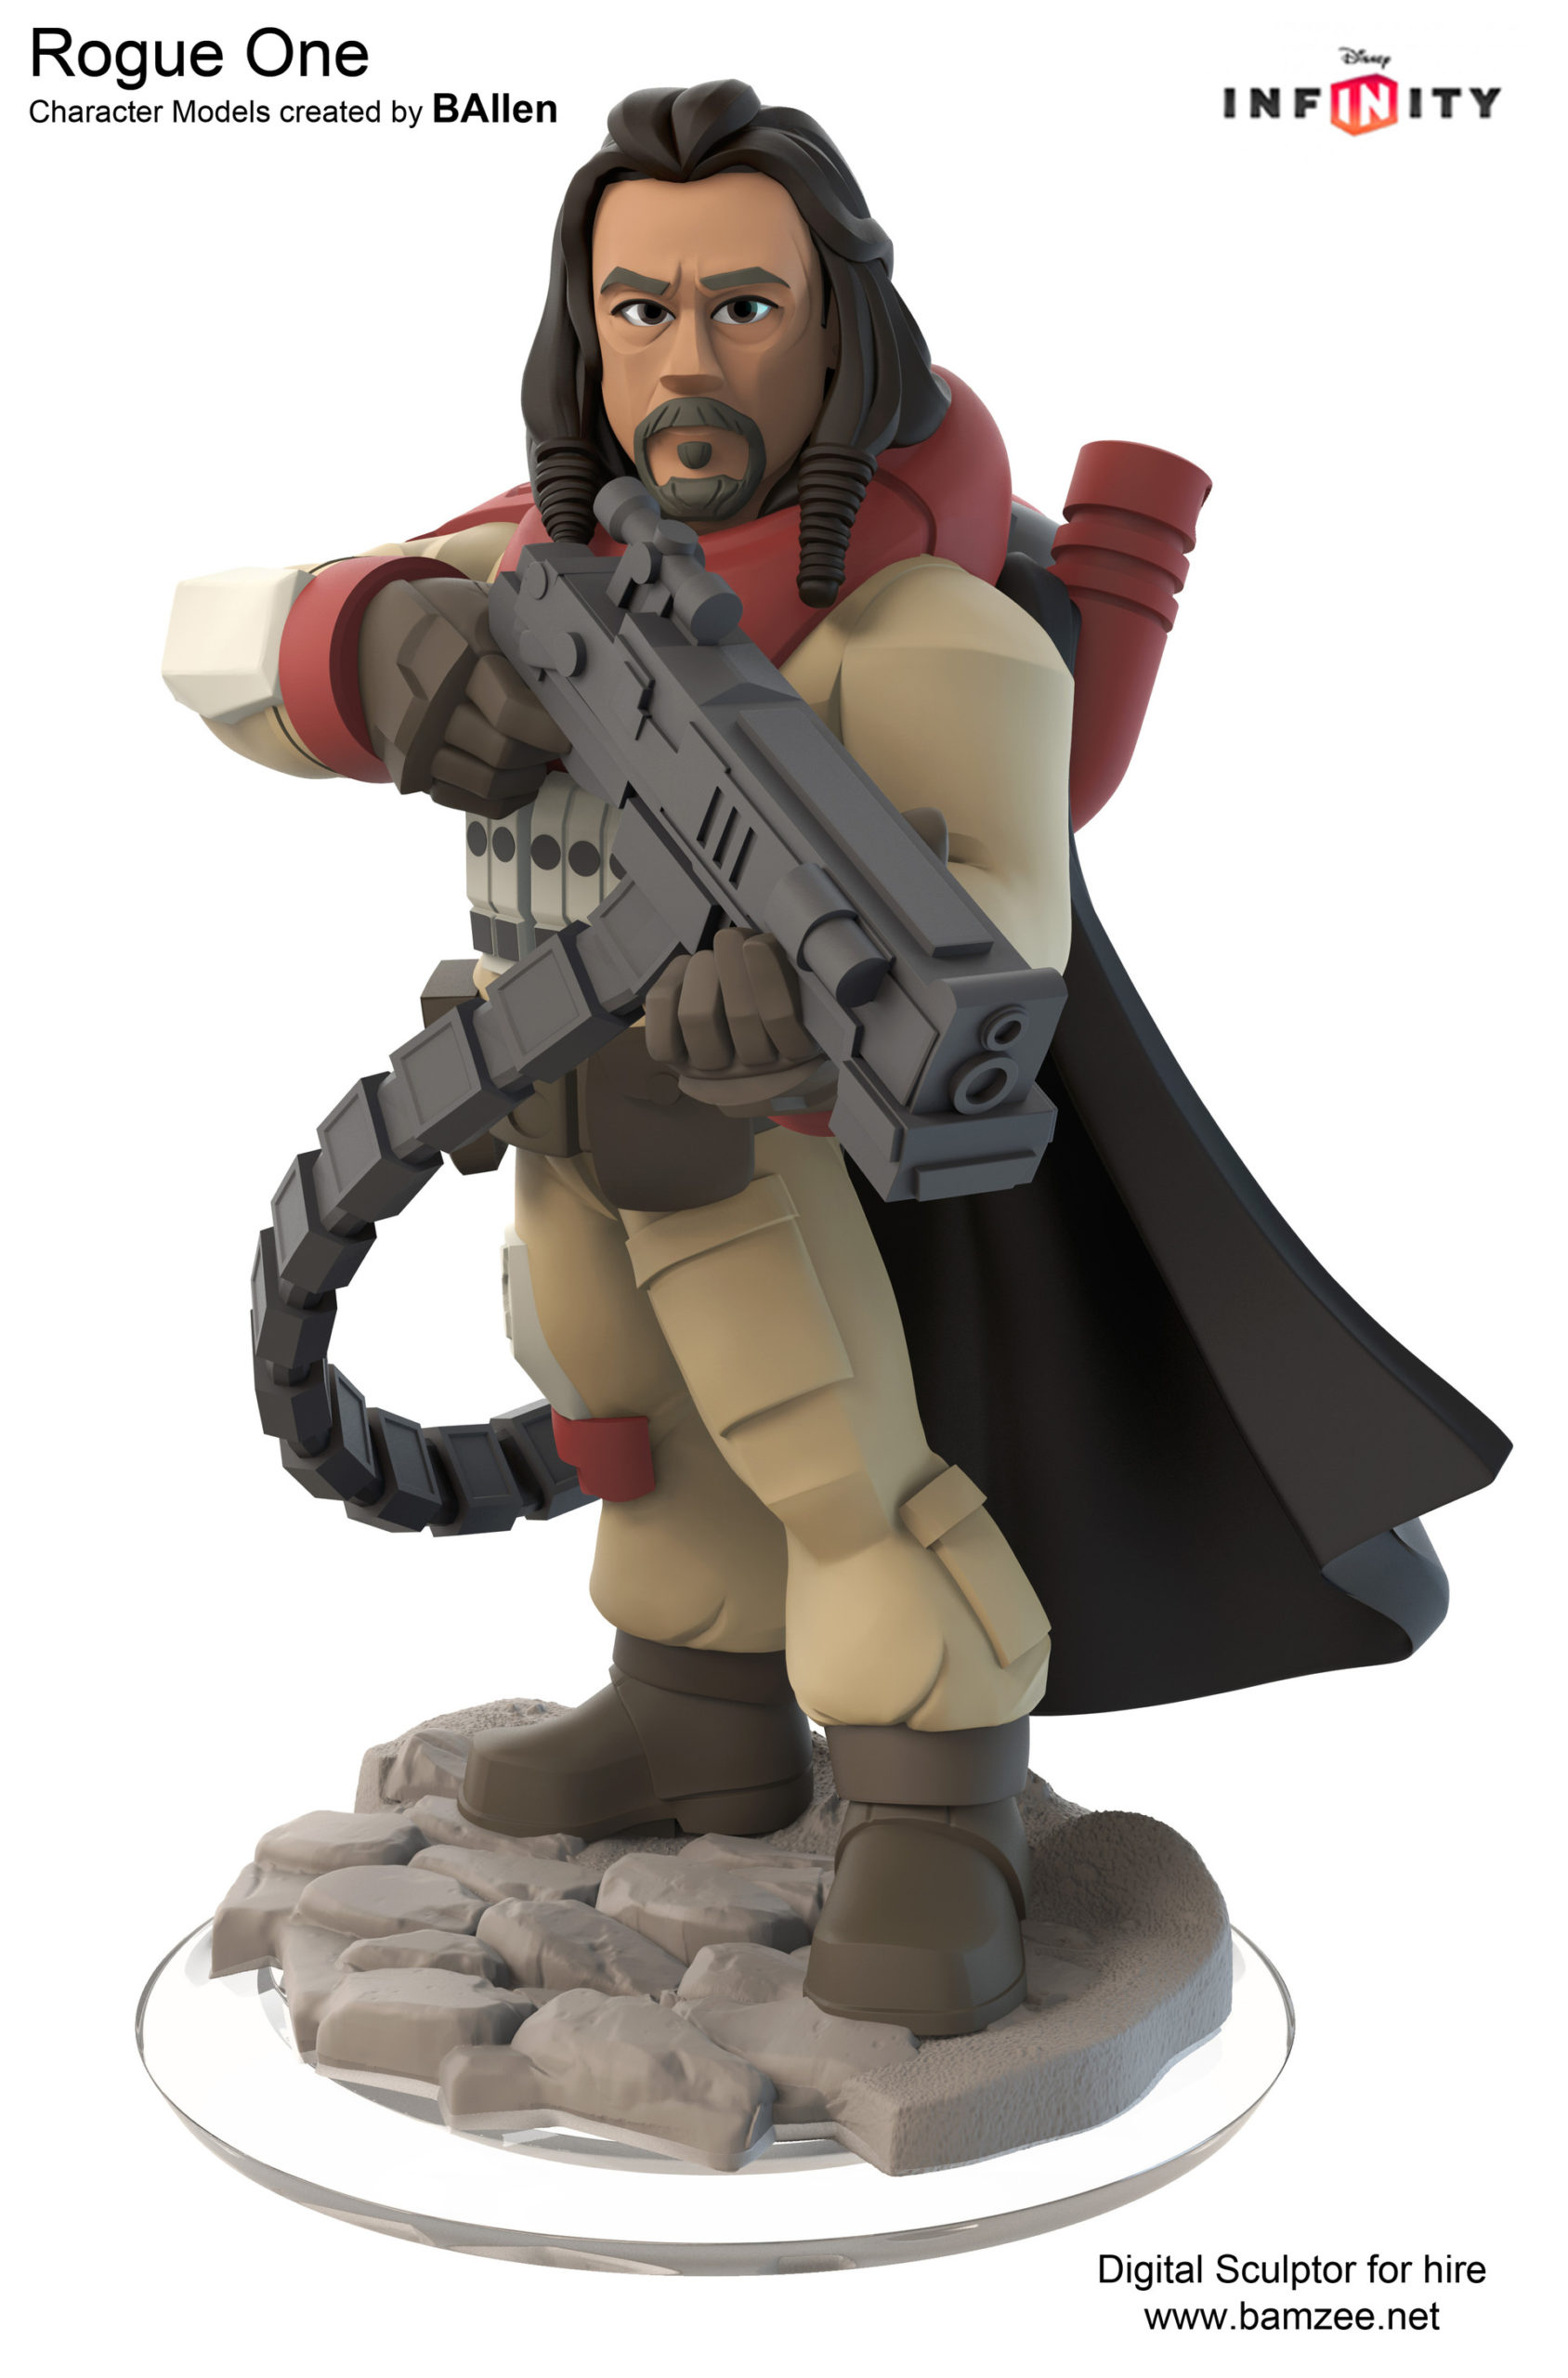 There Were Going To Be Rogue One Disney Infinity Figures